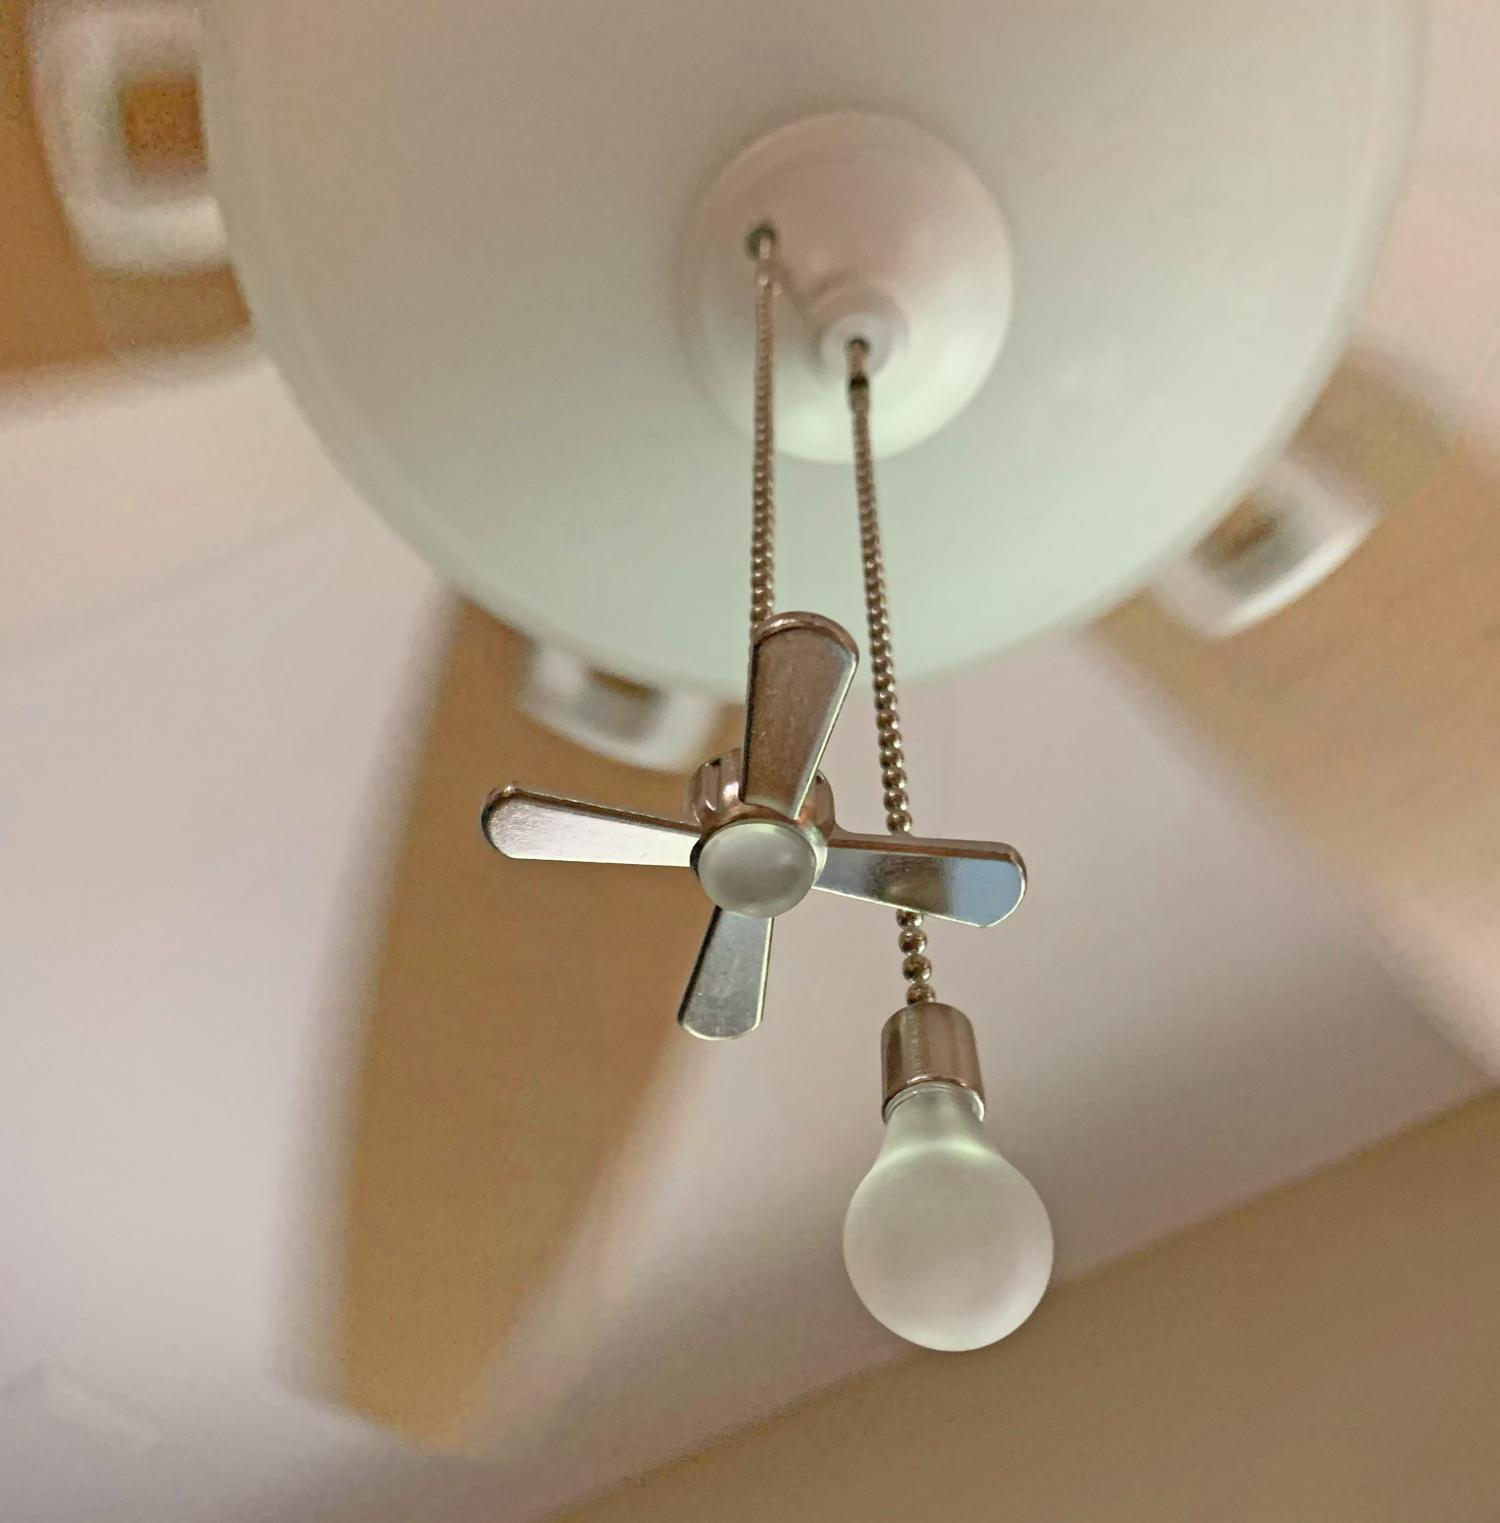 Fan and Light Bulb shaped pull-string chain set